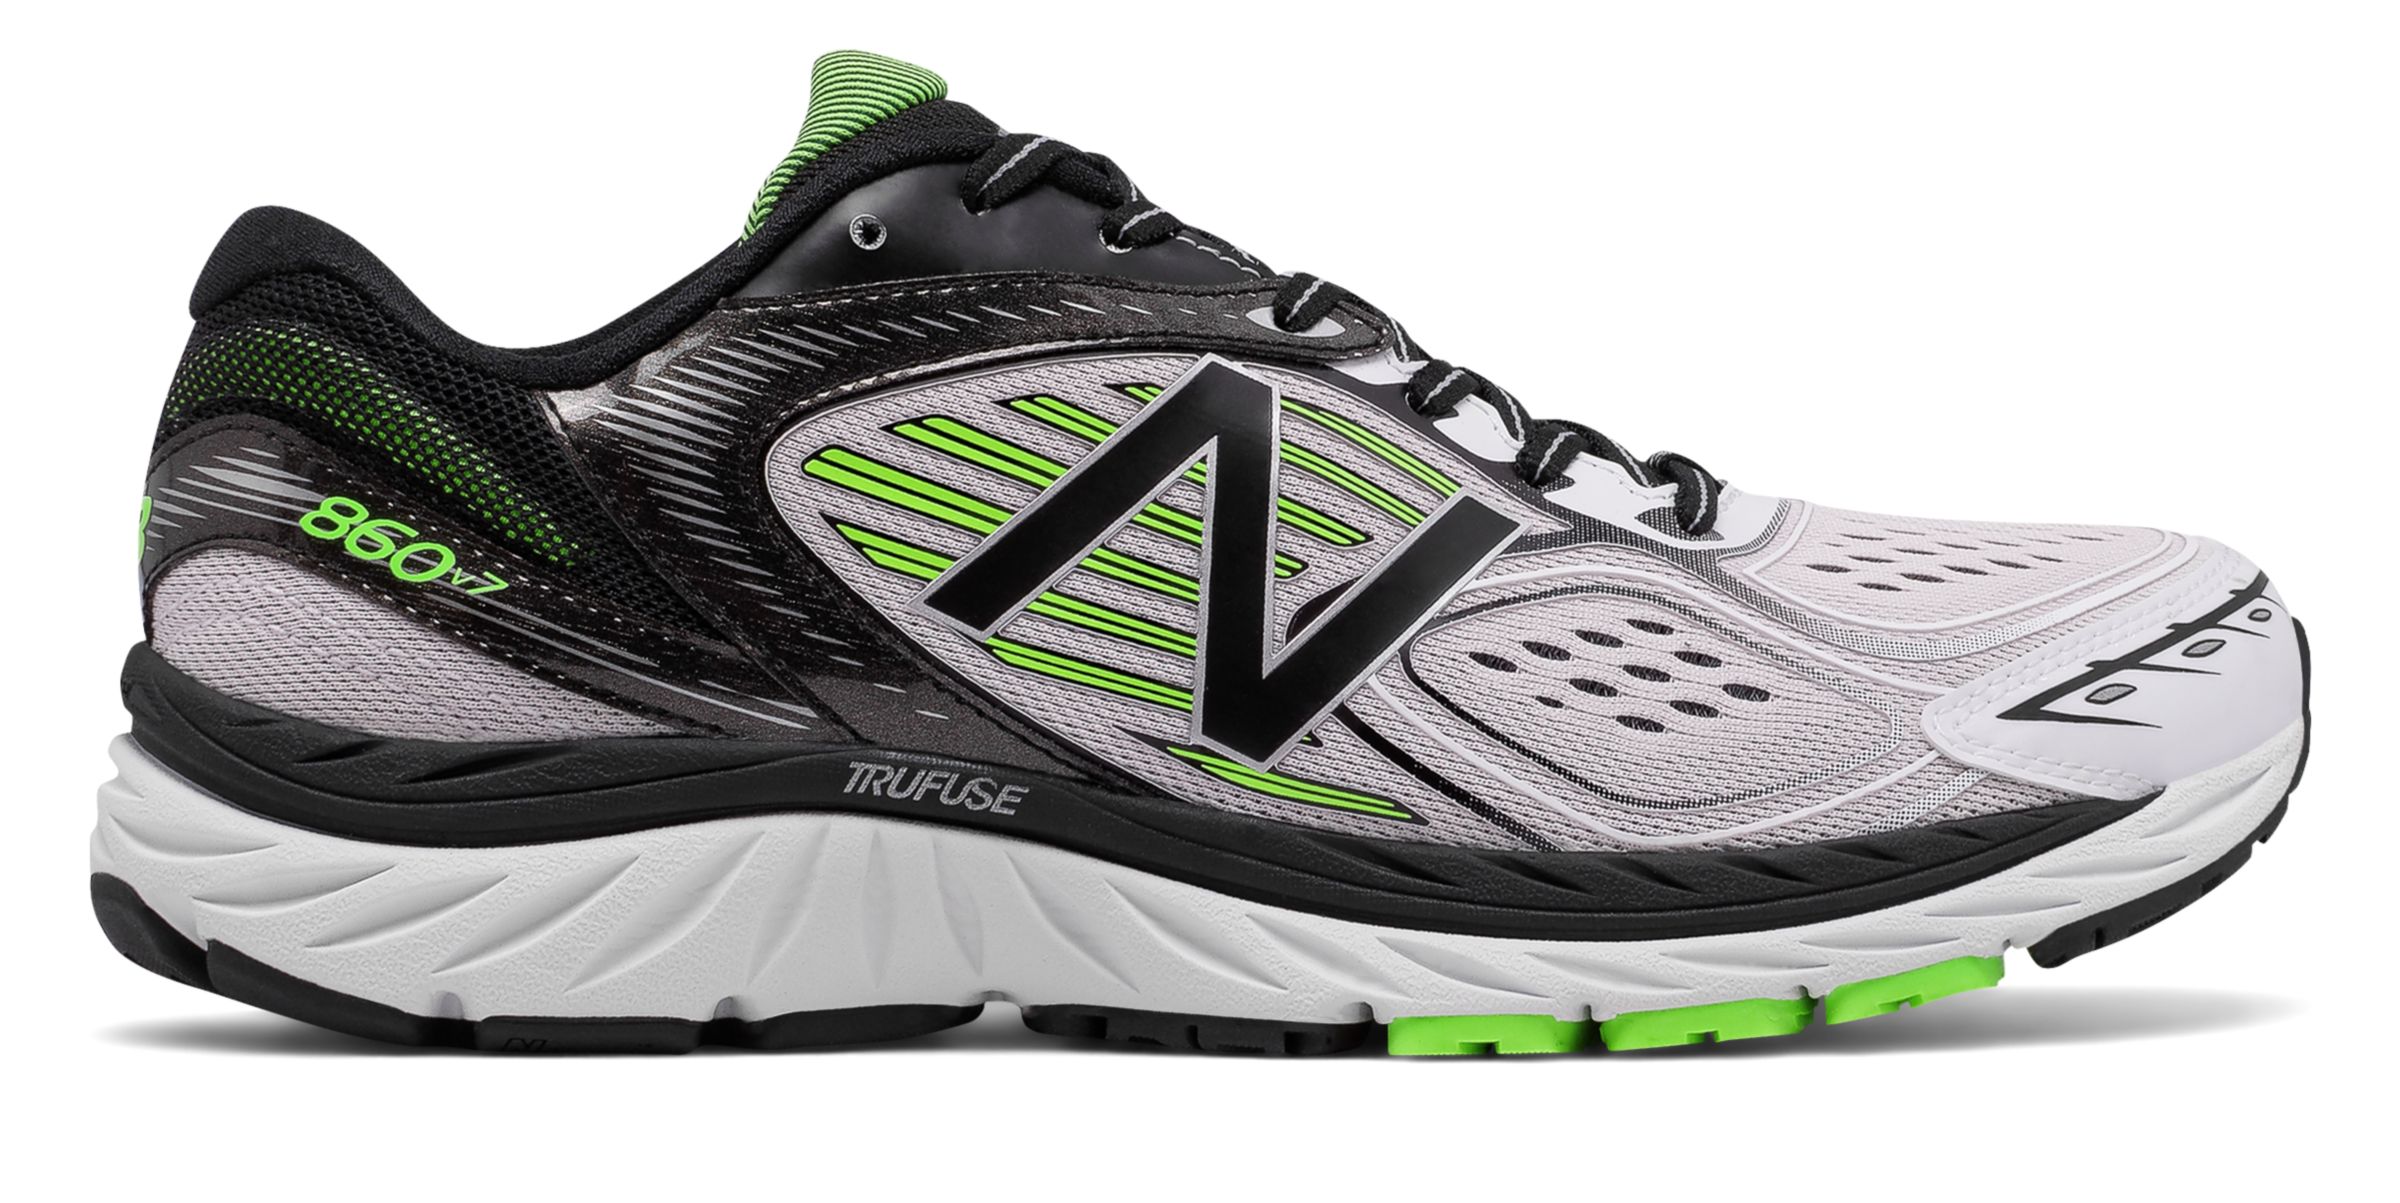 New Balance M860-V7 on Sale - Discounts Up to 20% Off on M860WB7 at Joe's New  Balance Outlet